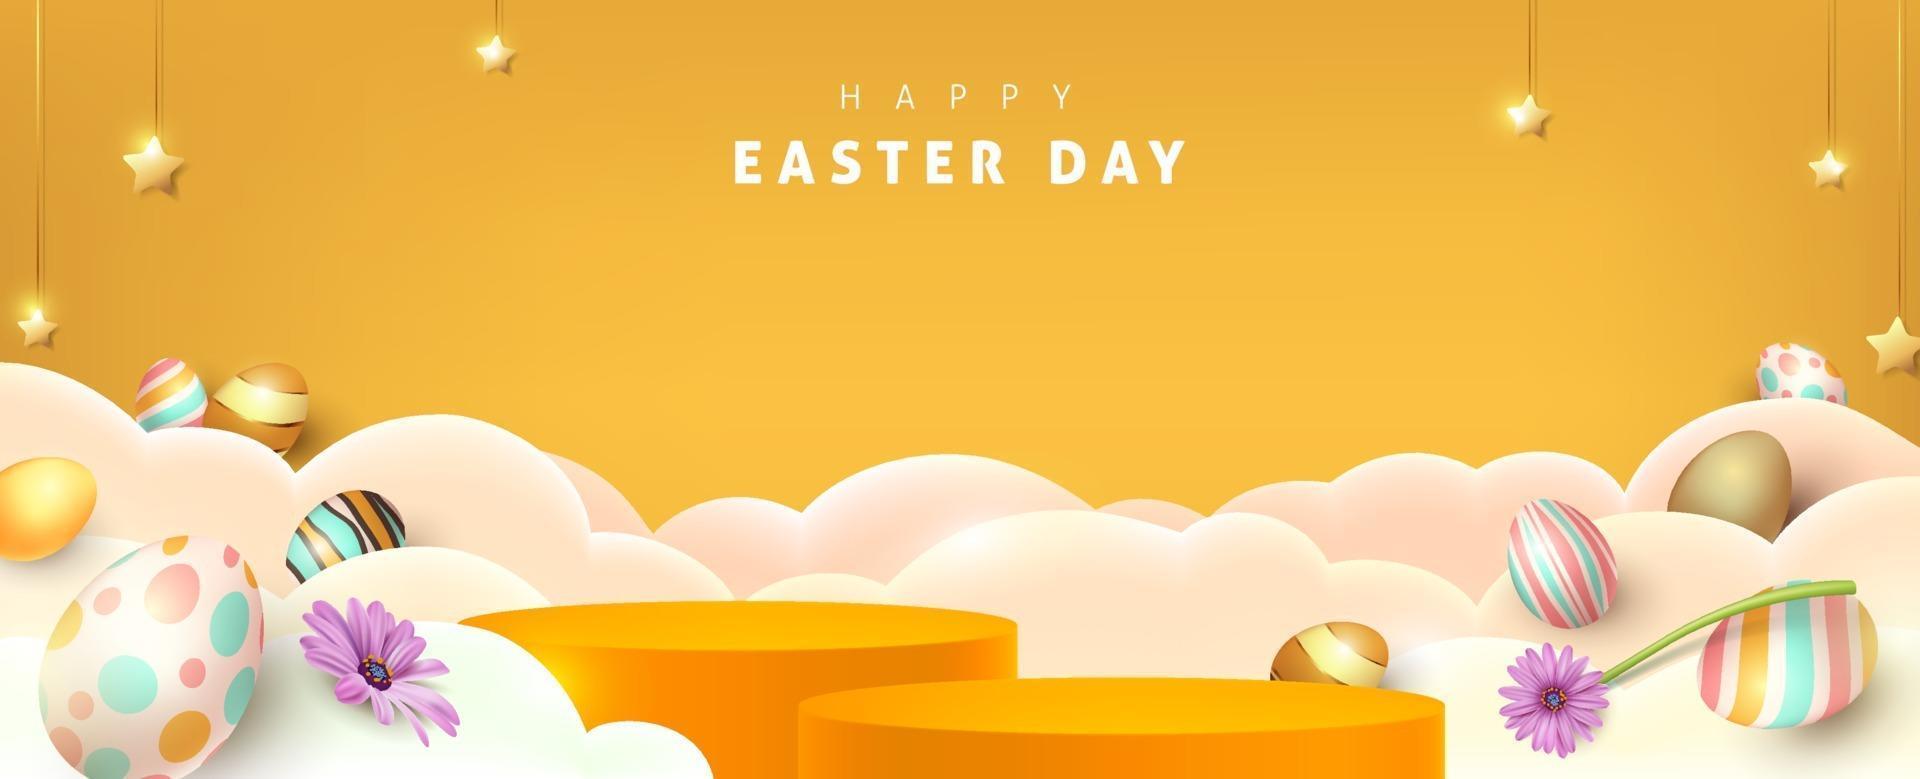 Happy easter banner with product display cylindrical shape and festive decoration vector